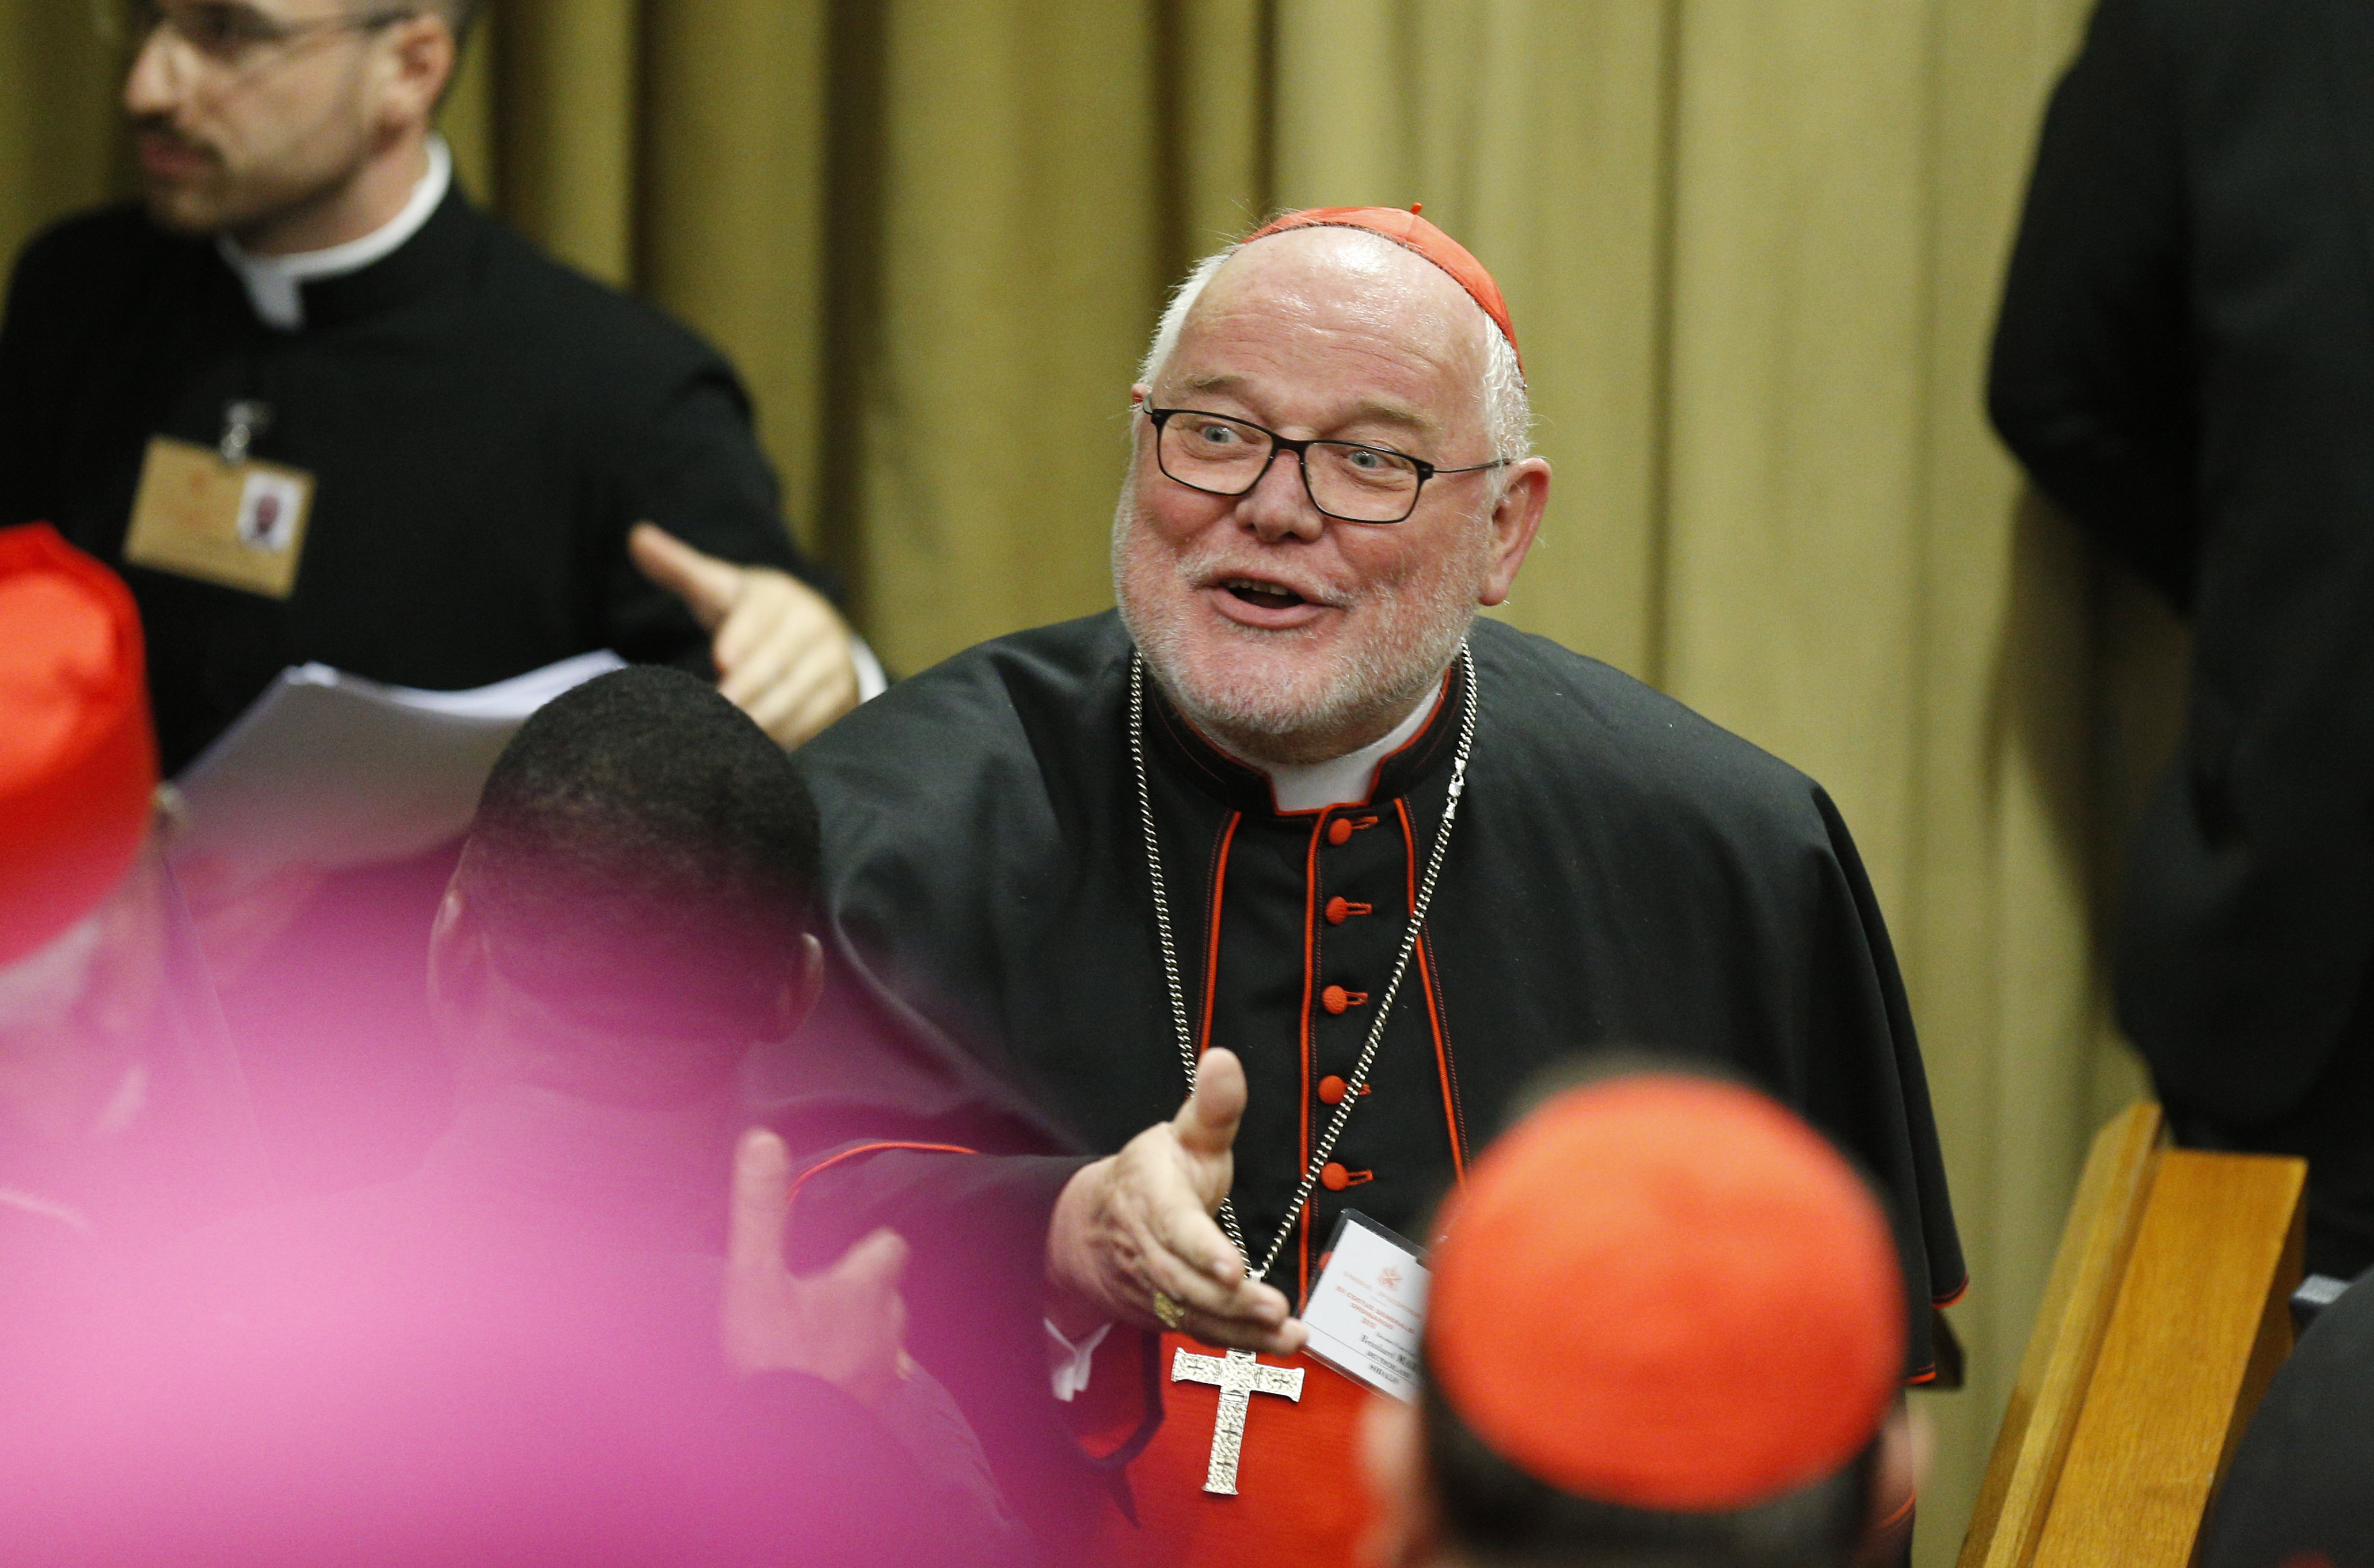 German cardinal urges change in tradition ahead of celibacy discussion